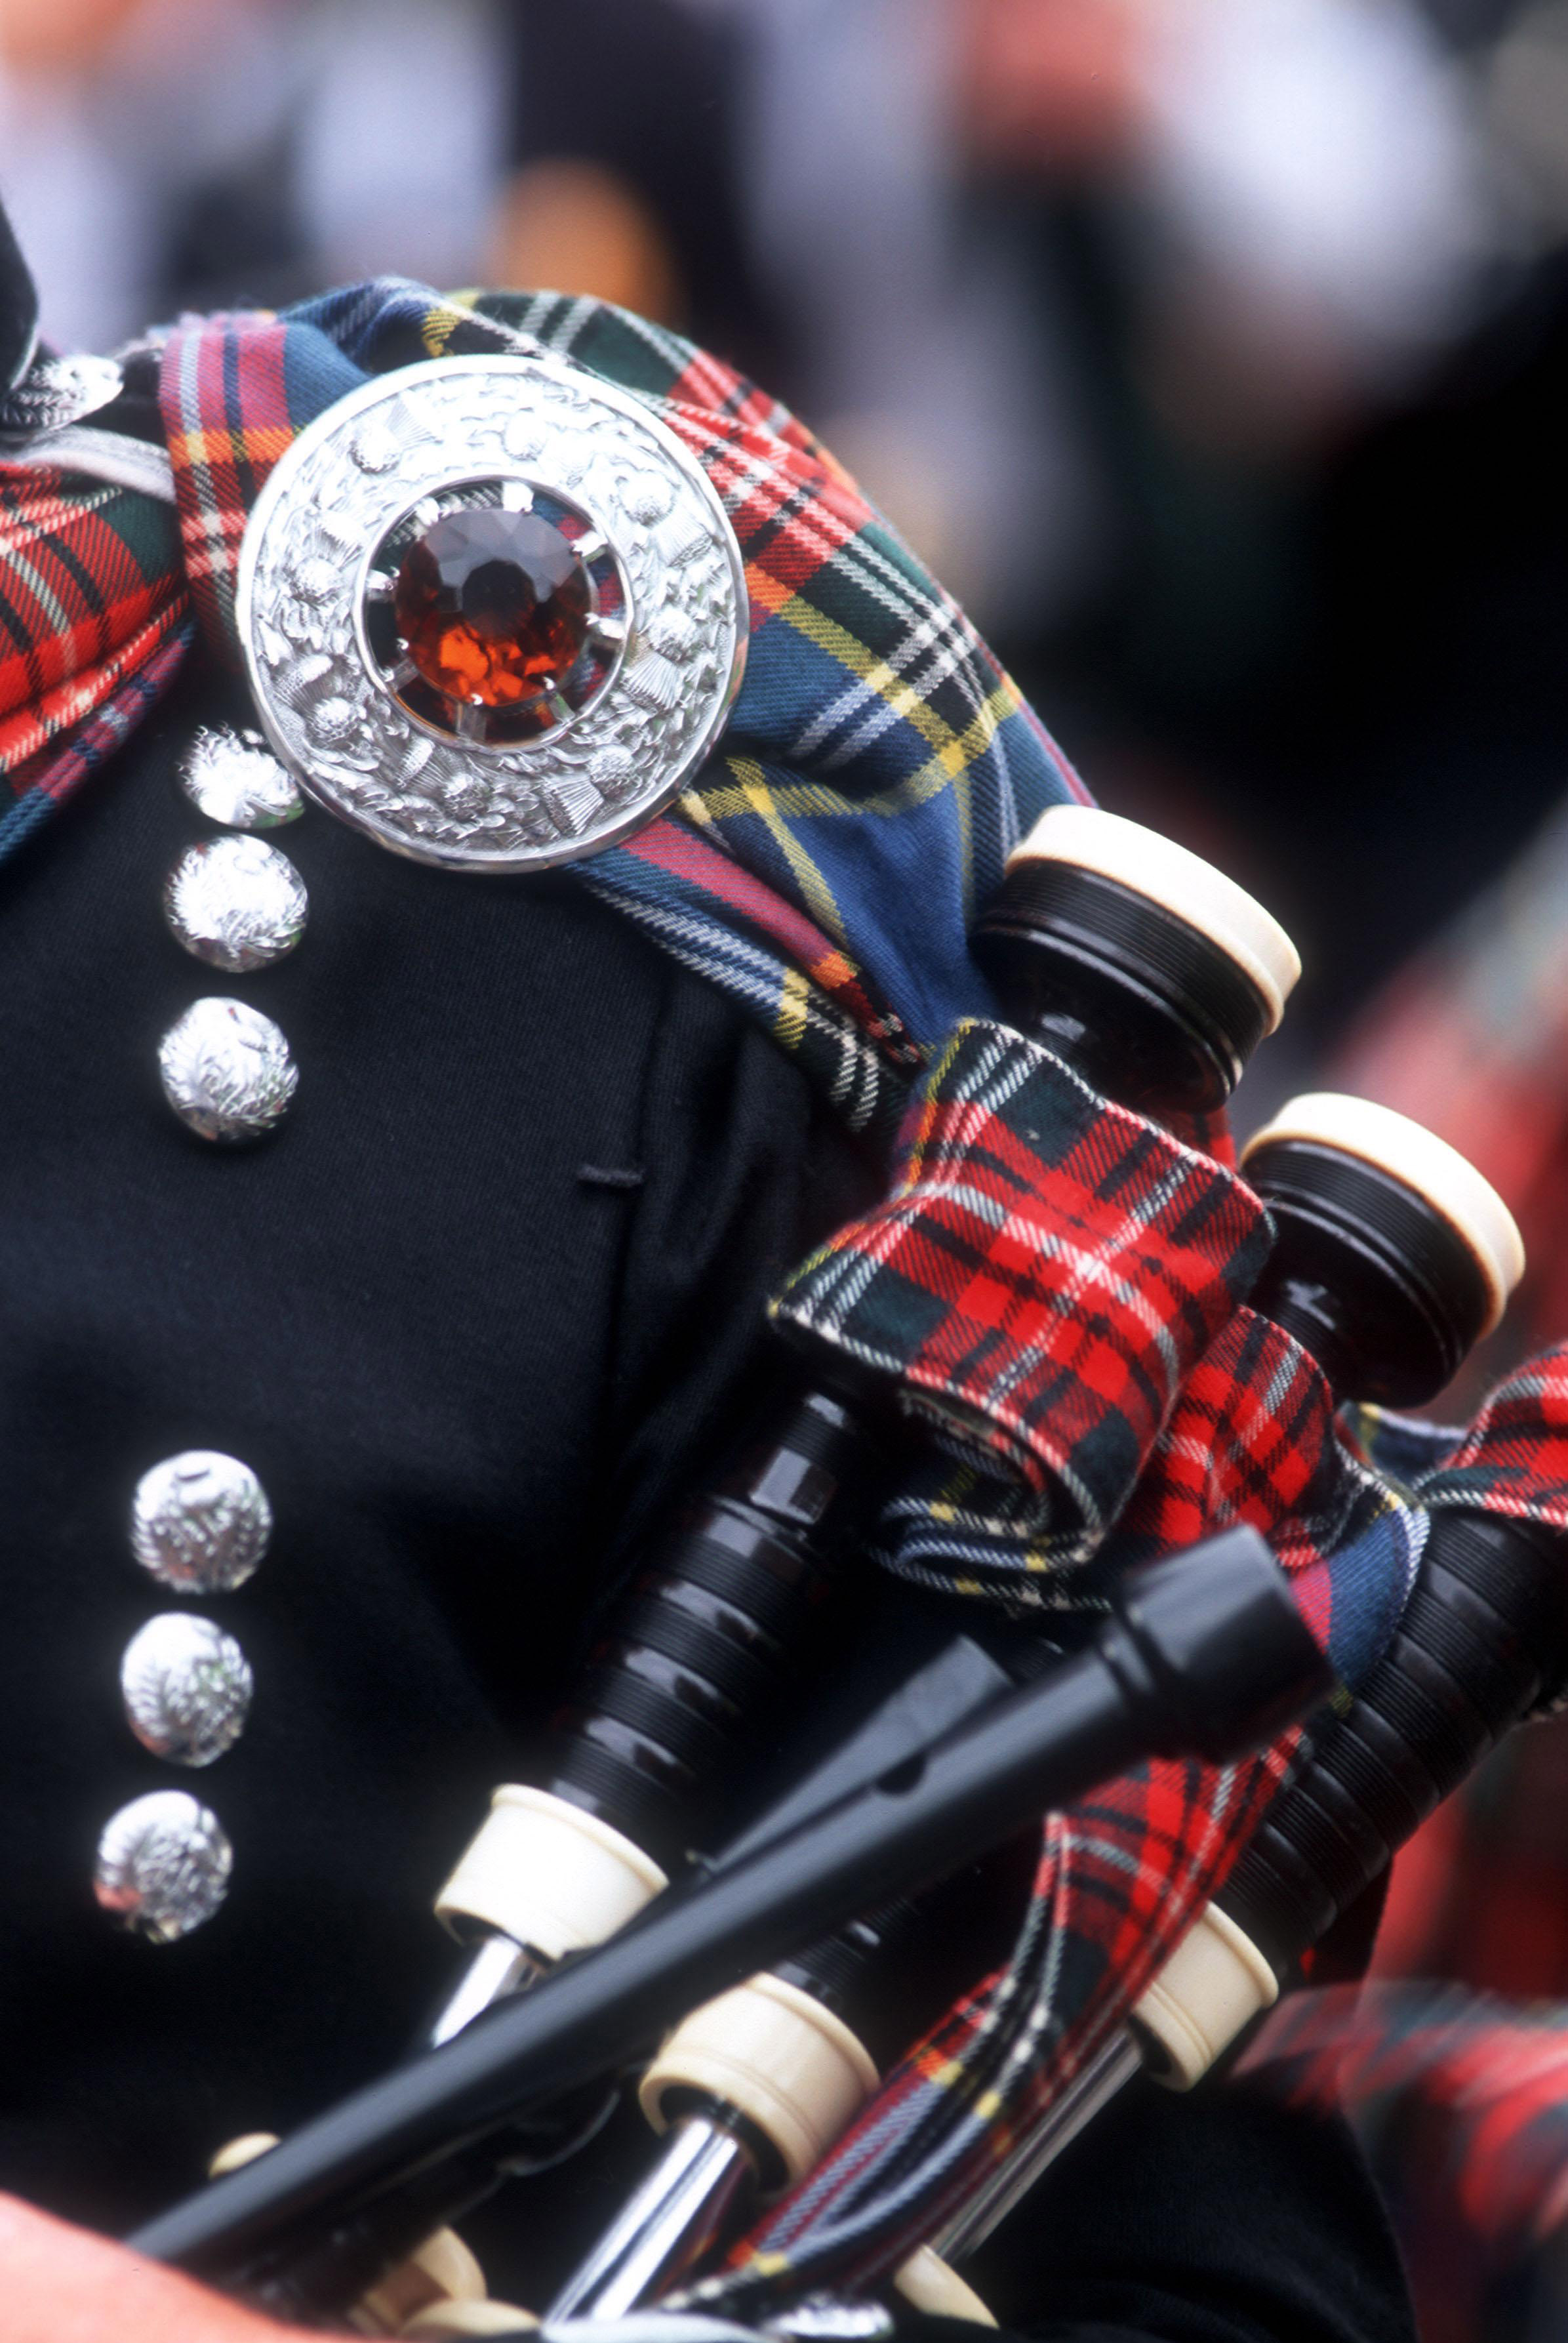 Top Off Your Trip with a Scottish Festival